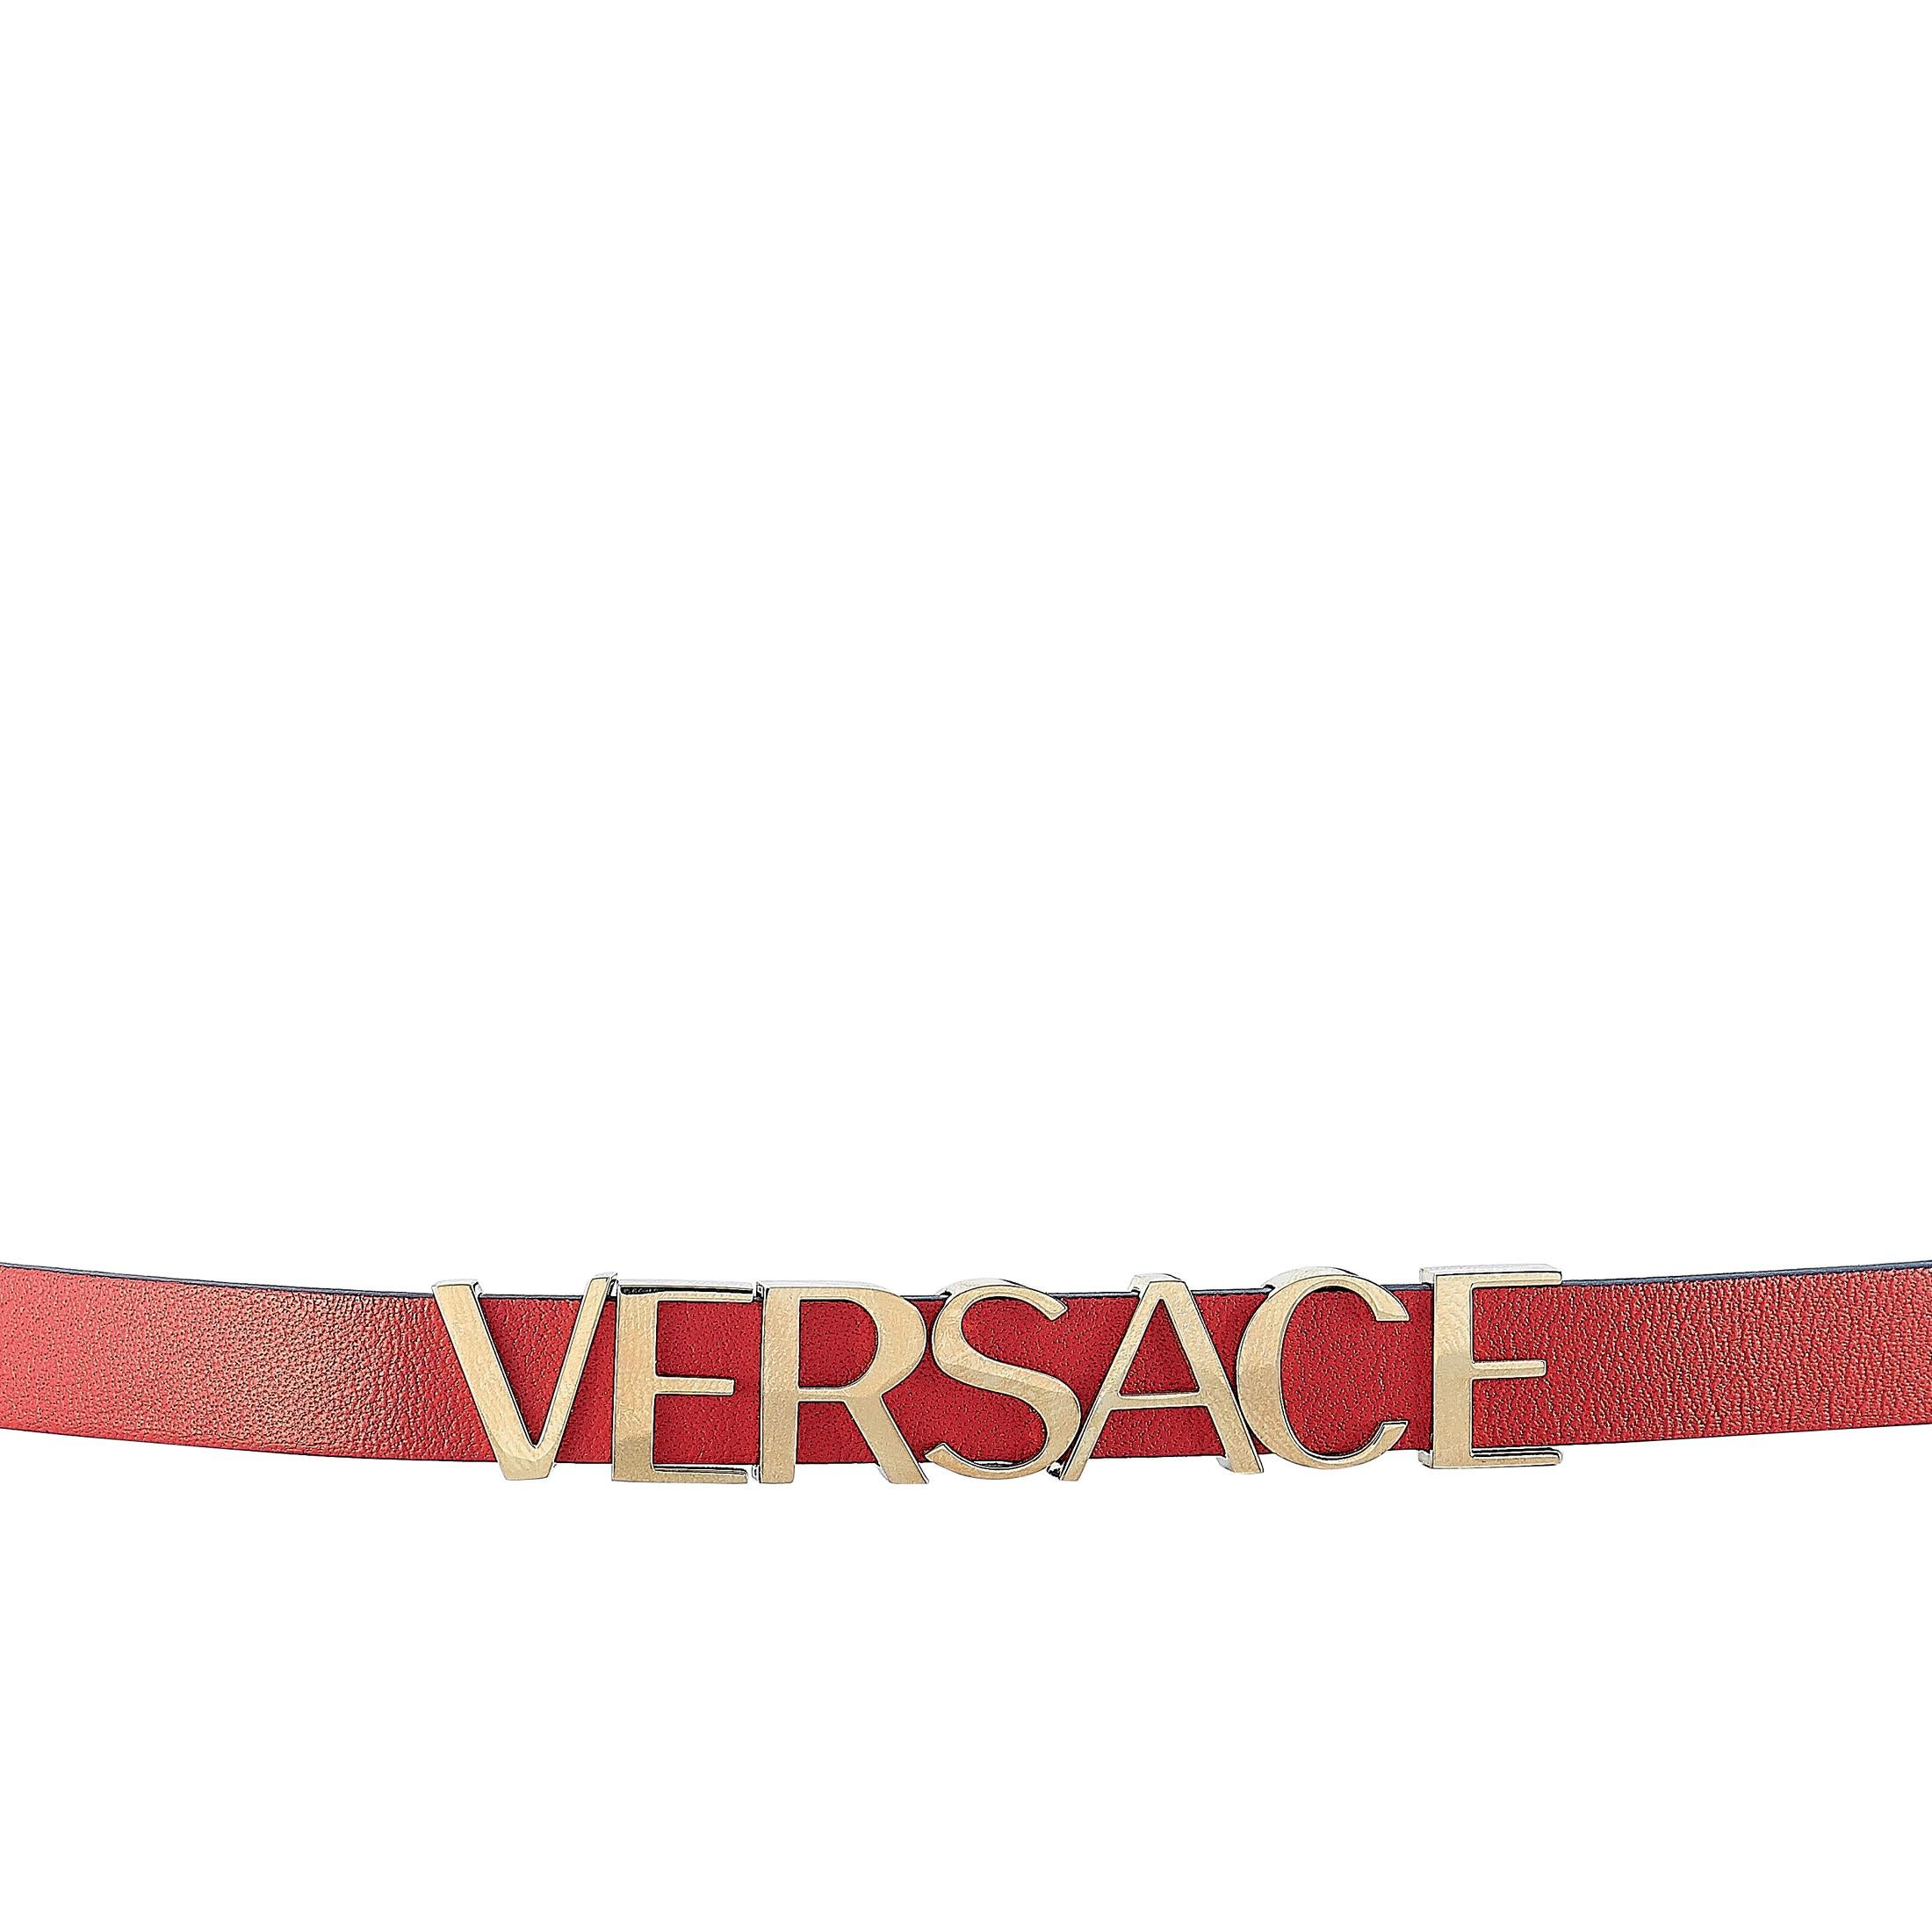 The Versace V-Flare watch, reference number VEBN00418, comes with a 28 mm gold-tone stainless steel case that offers water resistance of 30 meters. The case is presented on a red leather strap fitted with a tang buckle. The watch is powered by a